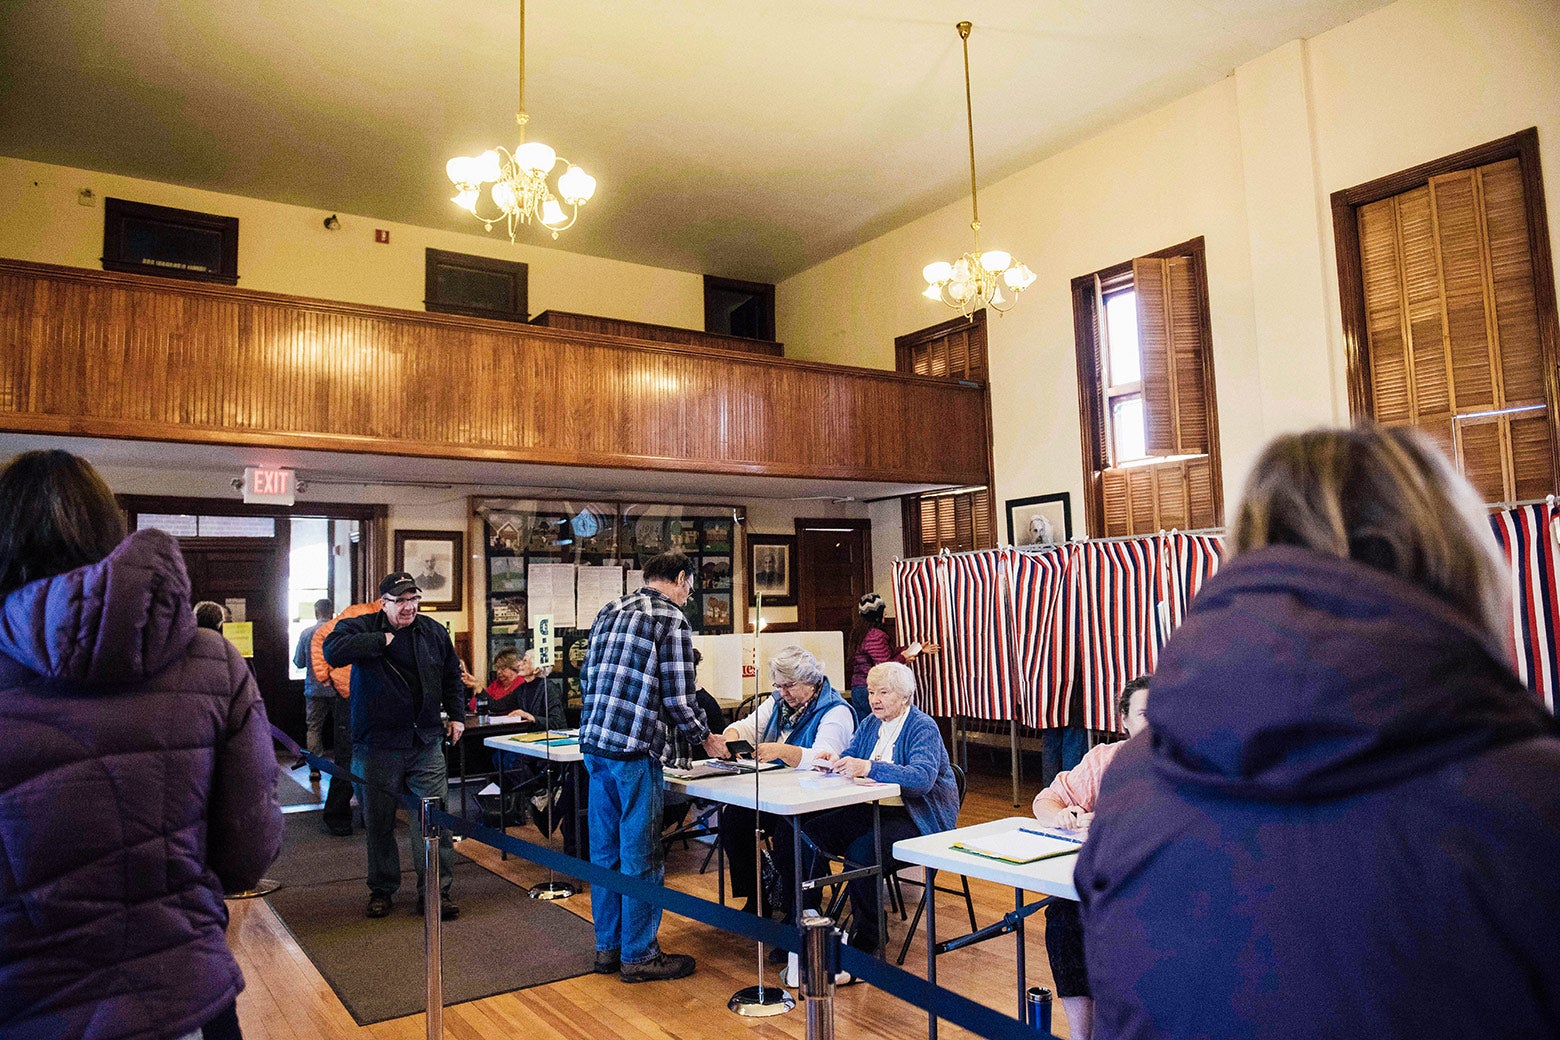 Voters cast their ballots in the presidential election at the Sutton town hall on Nov. 8, 2016, in New Hampshire.